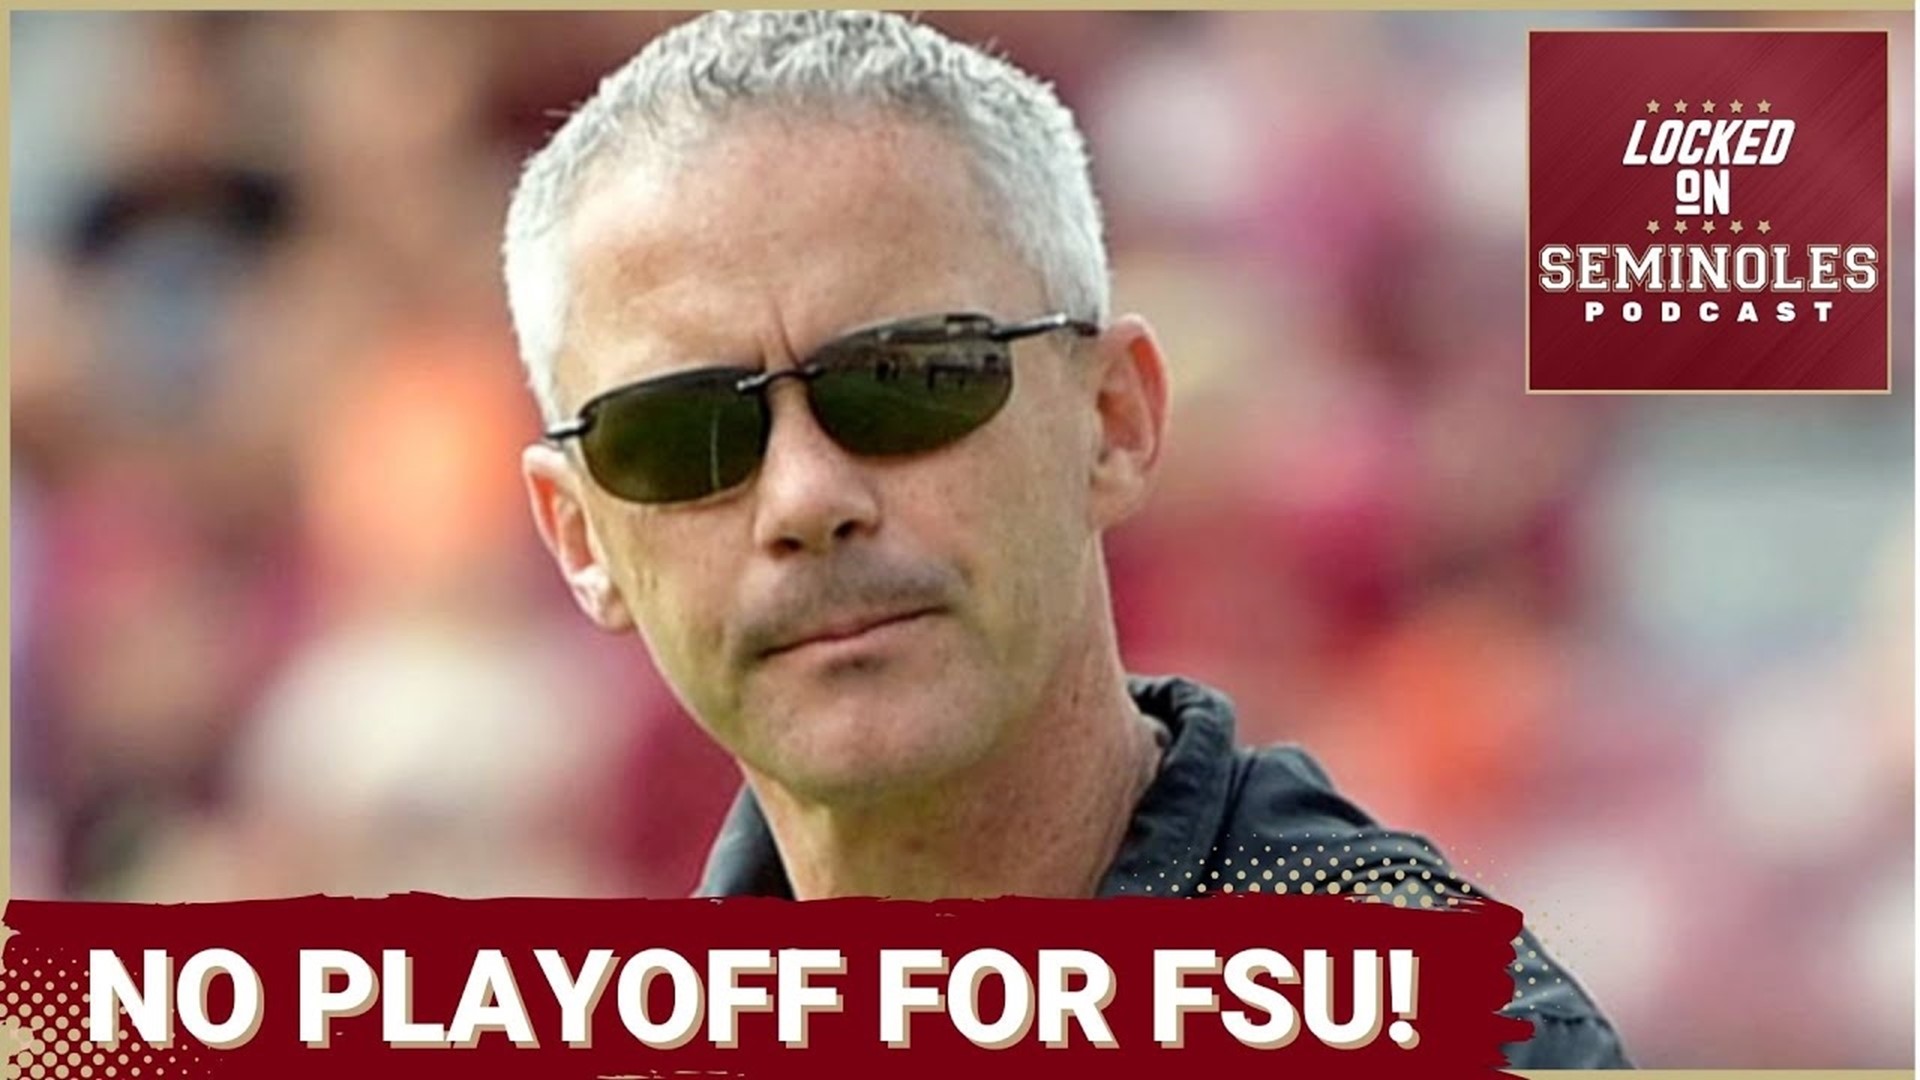 Should Florida State have been left out of the College Football Playoff? Breaking down the primary reason the Playoff Committee made the decision they did.